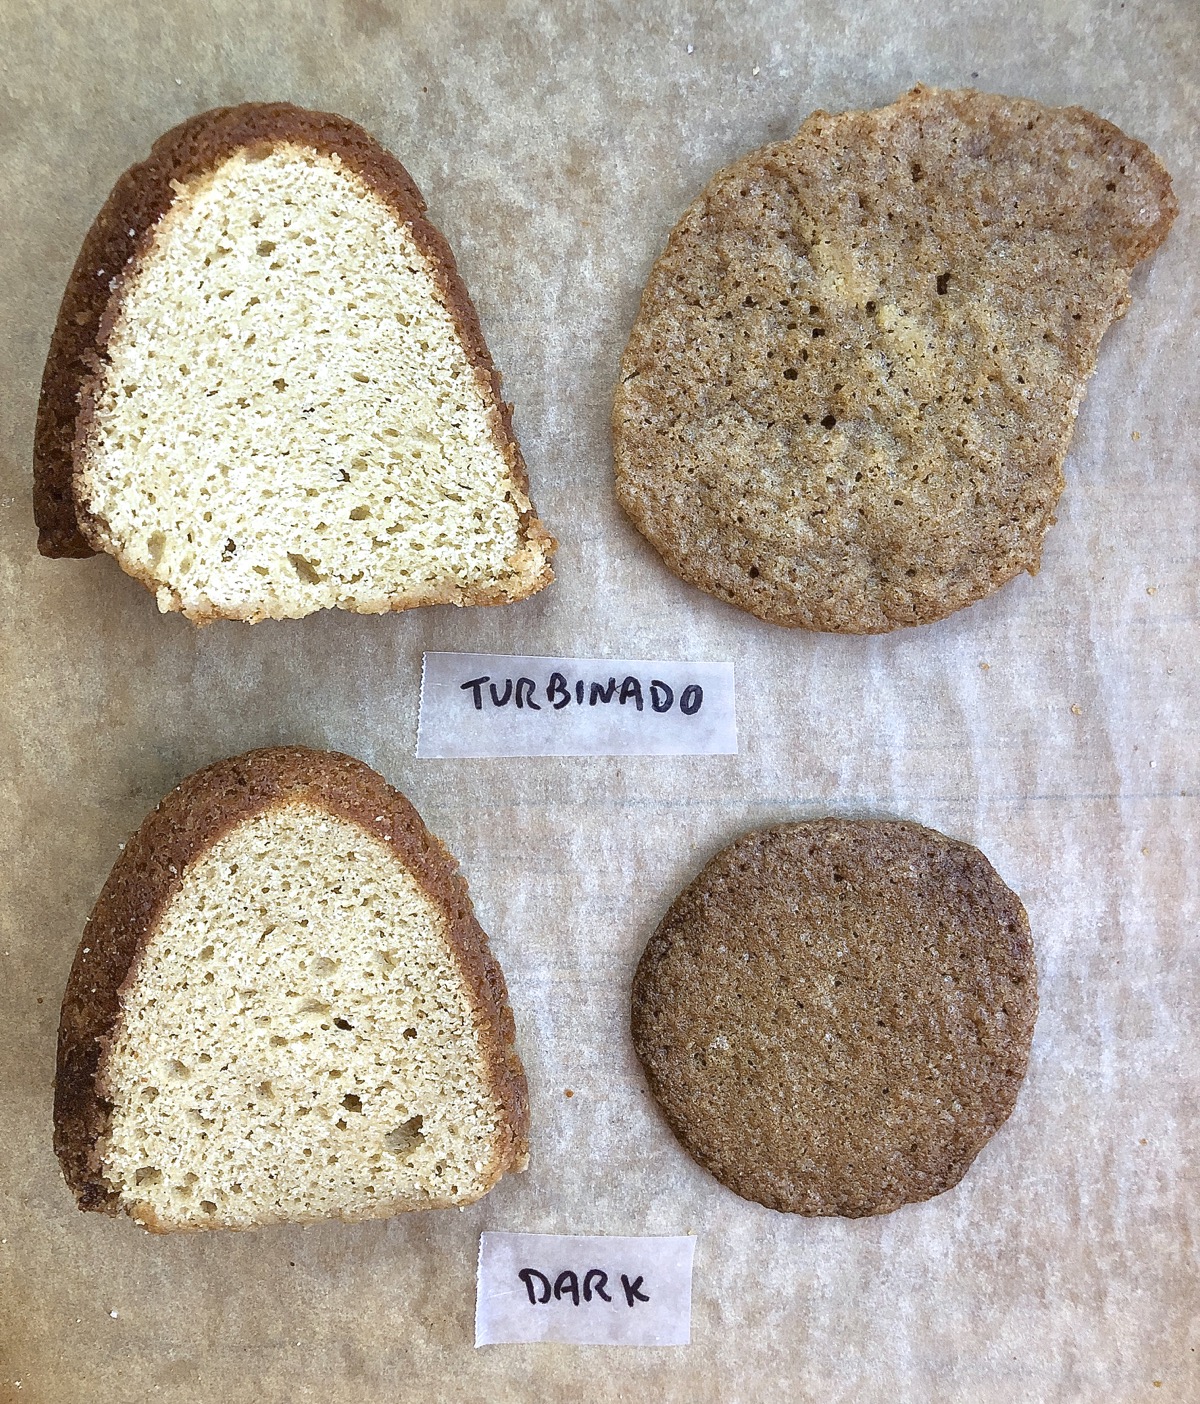 Slice of pound cake and a cookie made with turbinado sugar, vs. made with dark brown sugar, to show the differences.